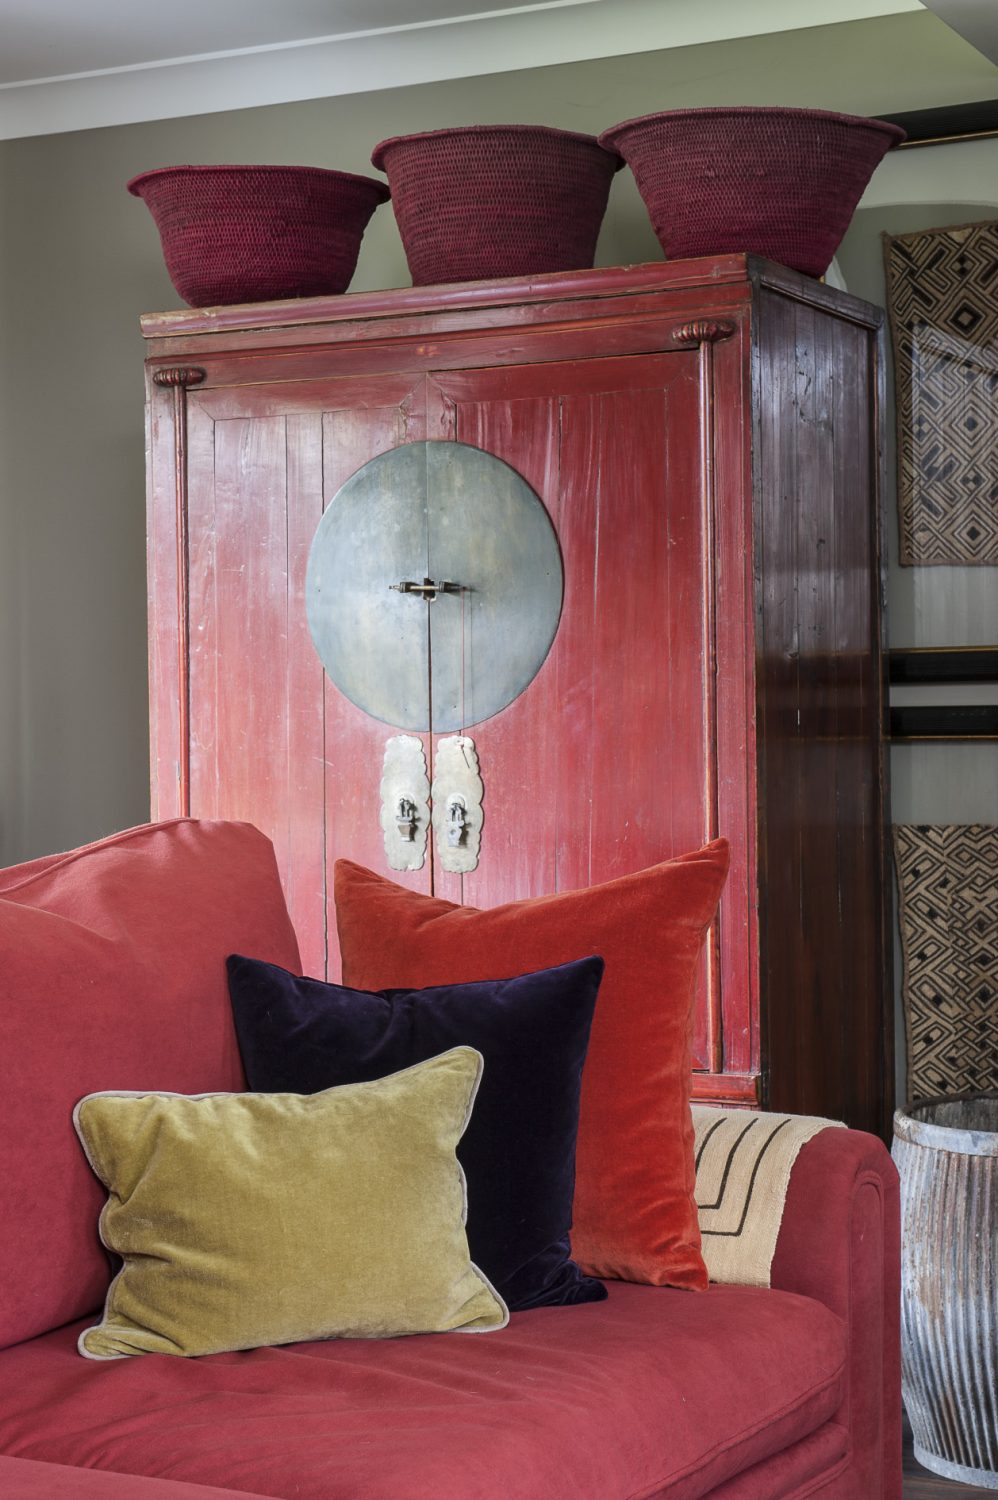 To the left of the woodburner, echoing the vibrant red of the sofa in front, stands a striking Chinese wedding cabinet